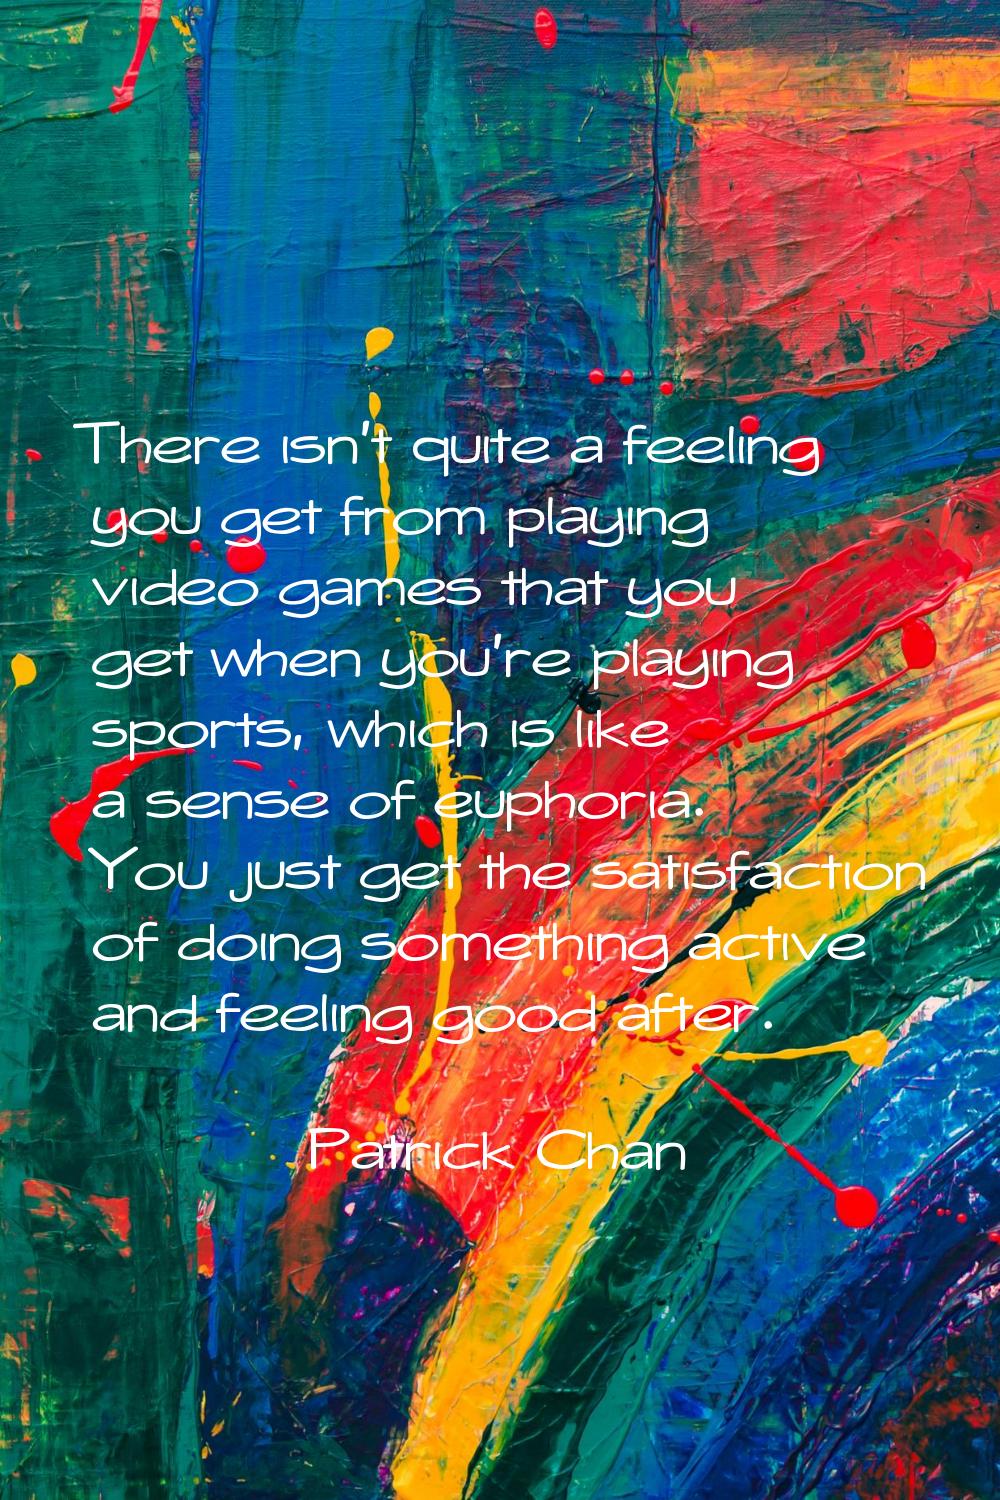 There isn't quite a feeling you get from playing video games that you get when you're playing sport